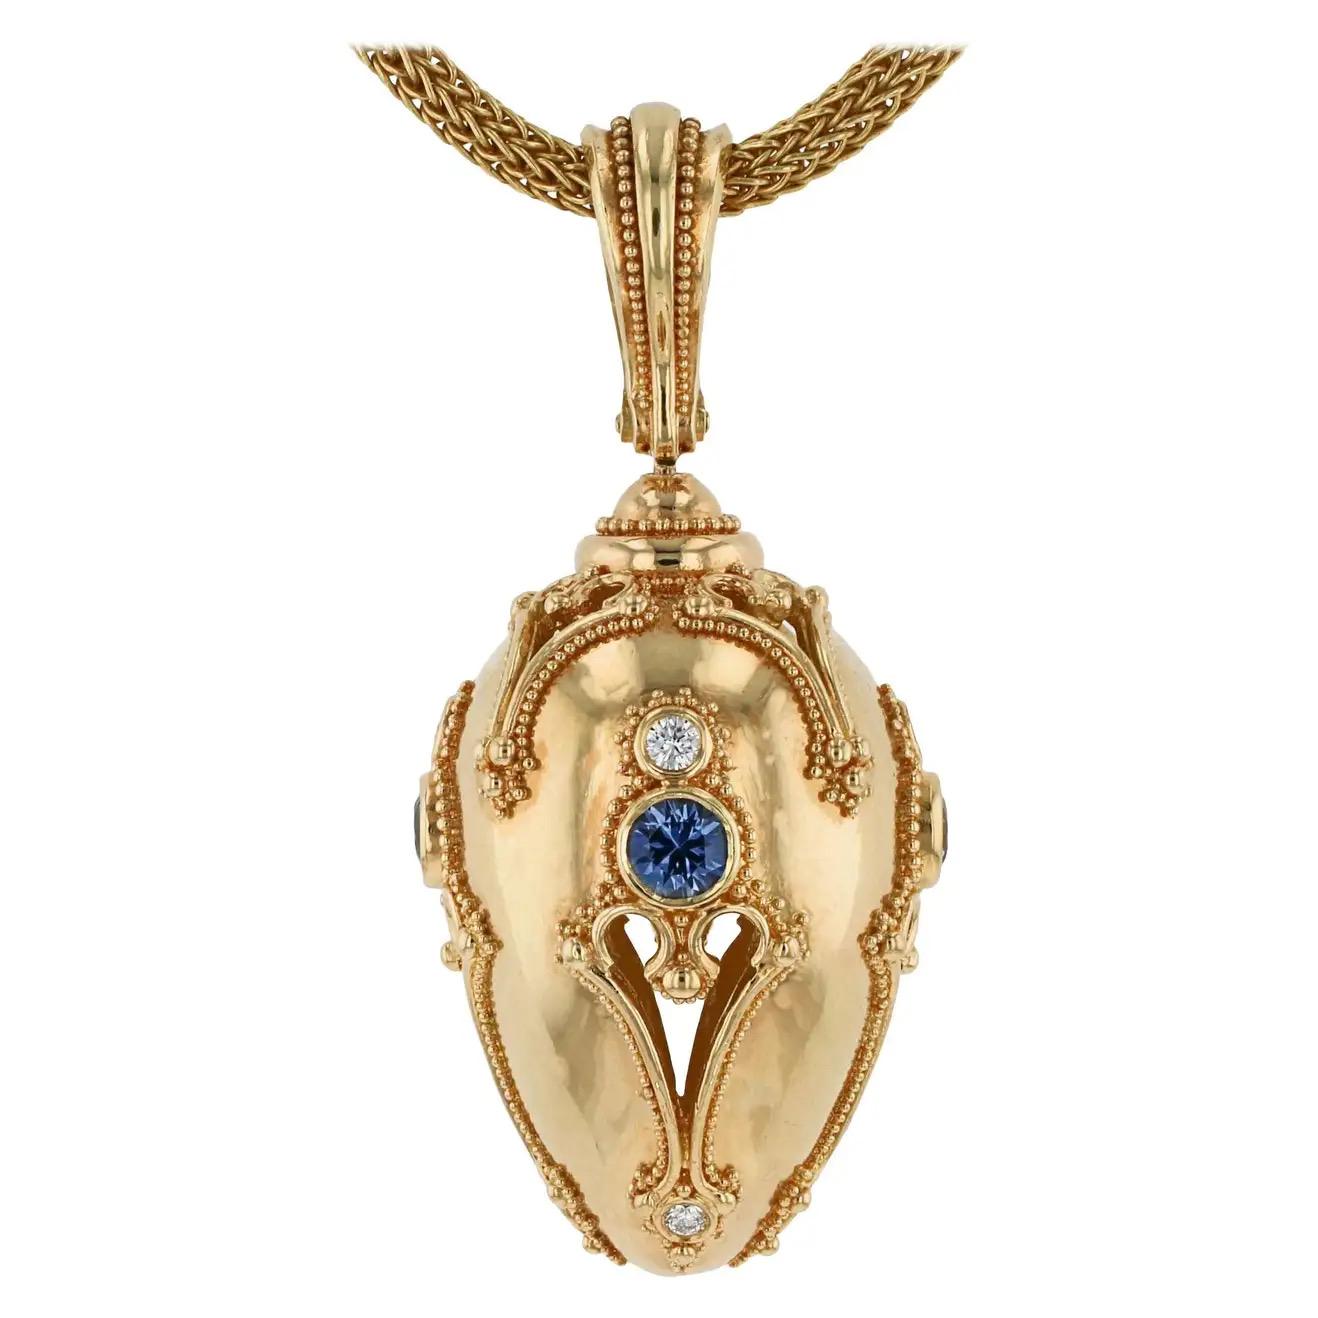 From the Kent Raible limited edition 'Studio Collection', we bring you the 'Golden Egg Pendant'. 
New beginnings have never been more beautiful! Soft Blue Sapphires and the sparkle of Diamond flash as the pendant spins and moves when worn.
In